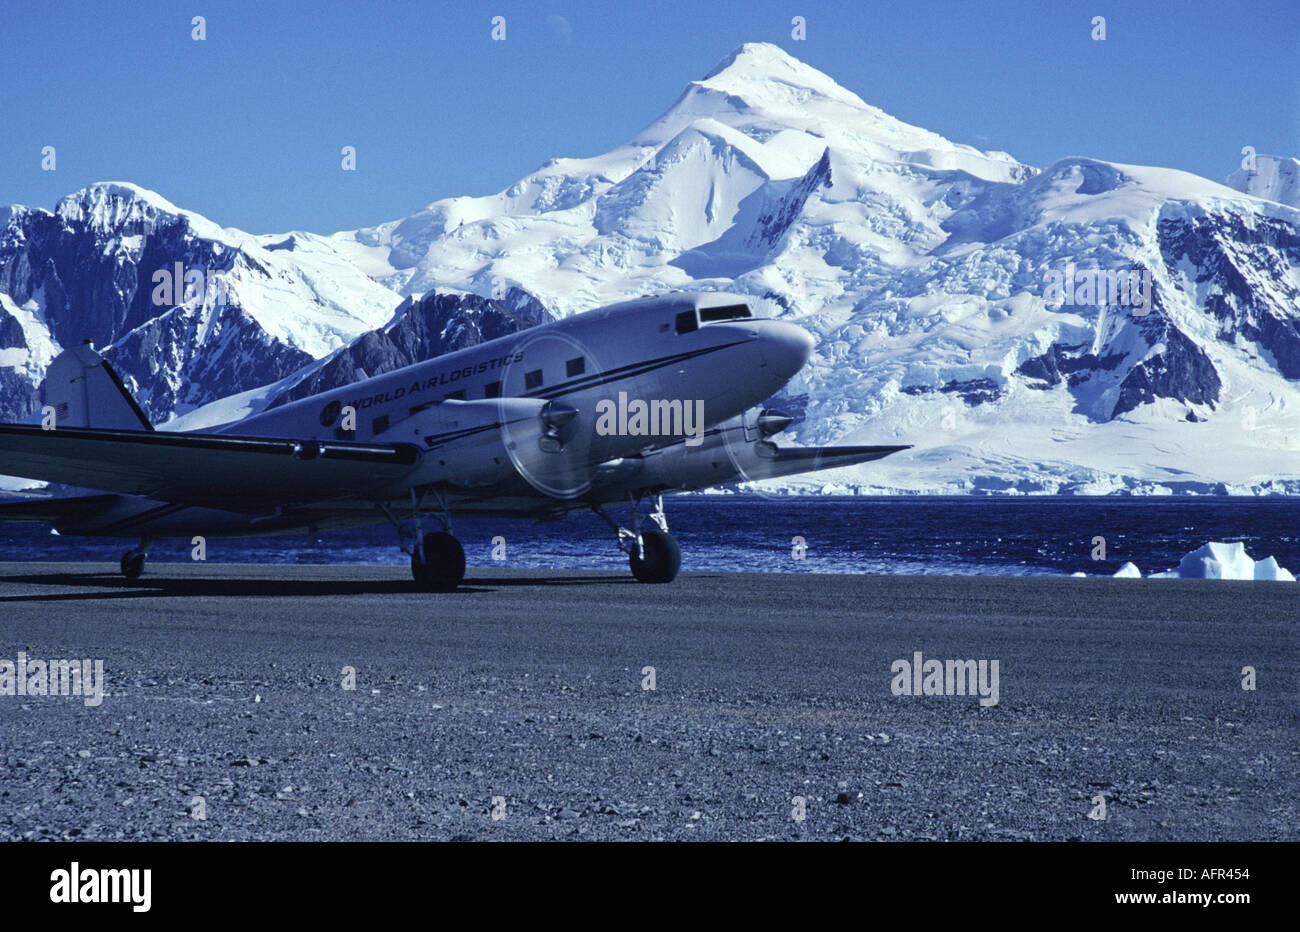 Basler Turbo BT 67 aircraft about to take off from airstrip at Rothera ...